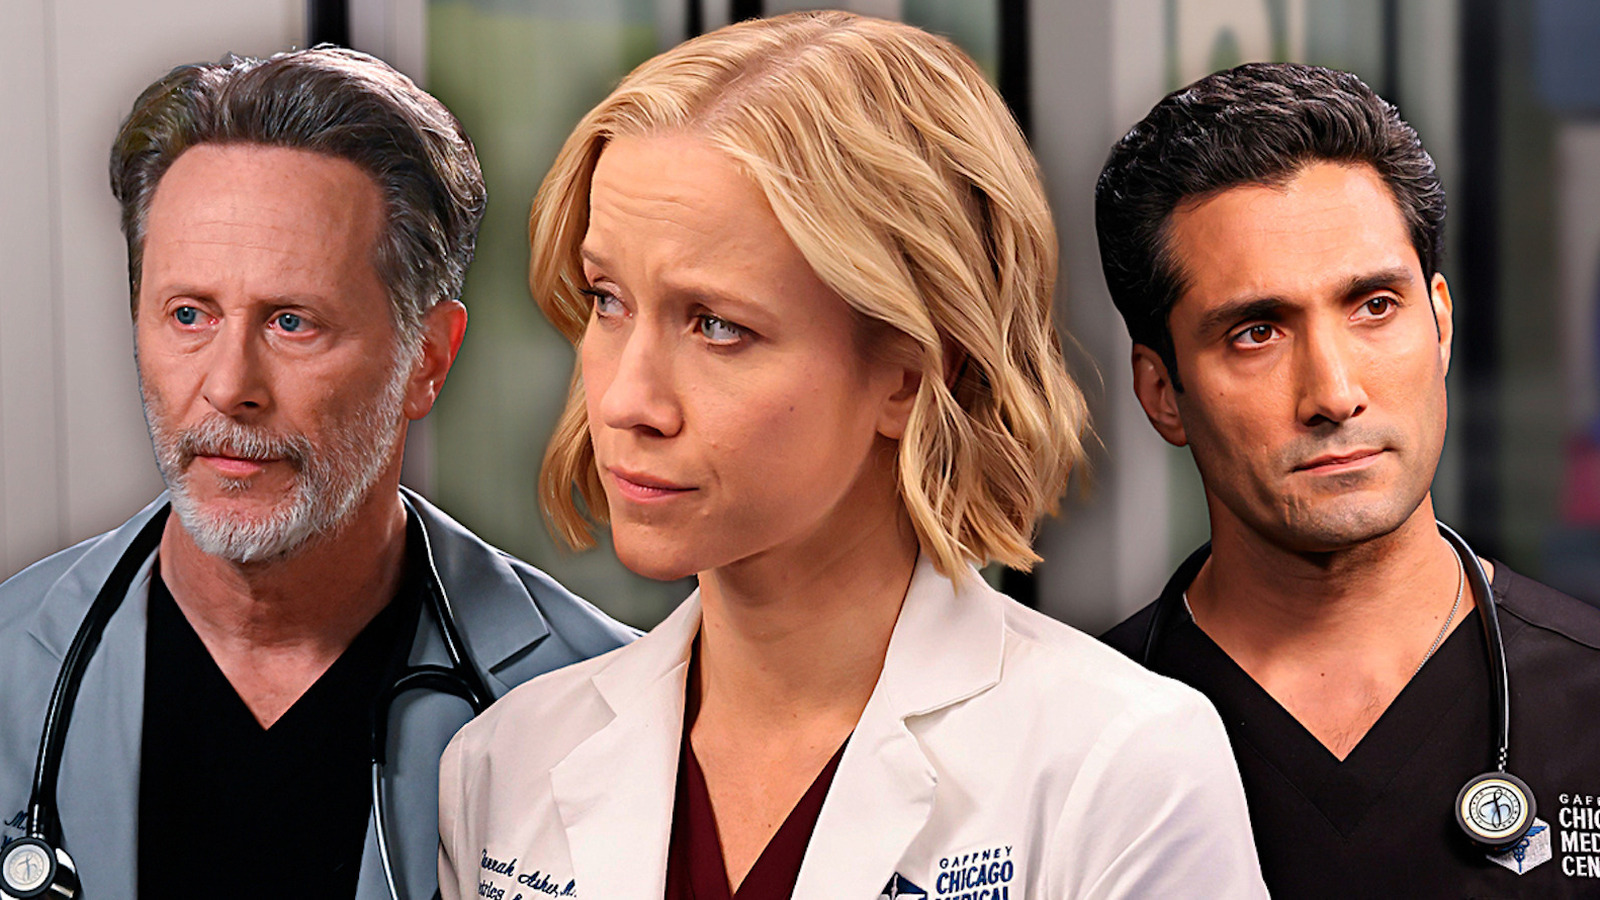 Discover The Reason for Chicago Med Season 9’s Unconventional Ending – Explained by the Experts